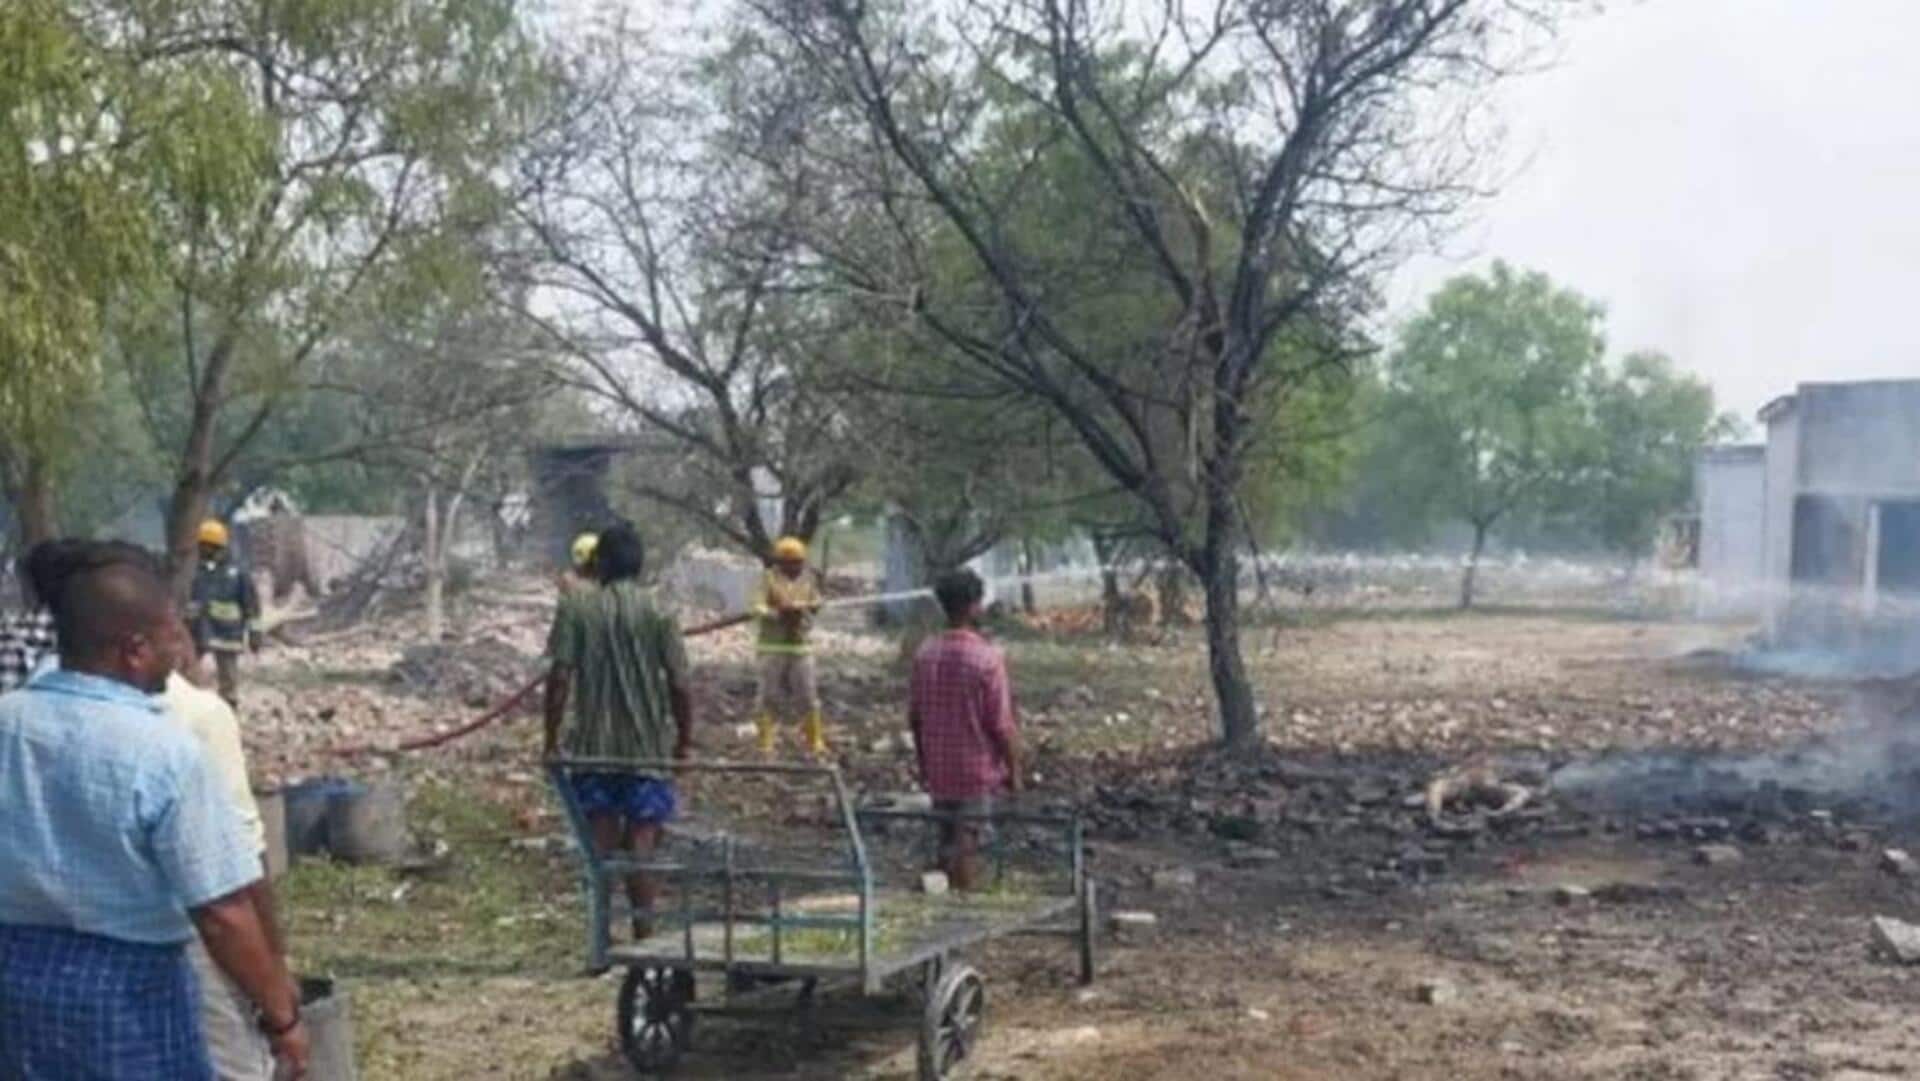 8 killed in explosion at fireworks factory in Tamil Nadu